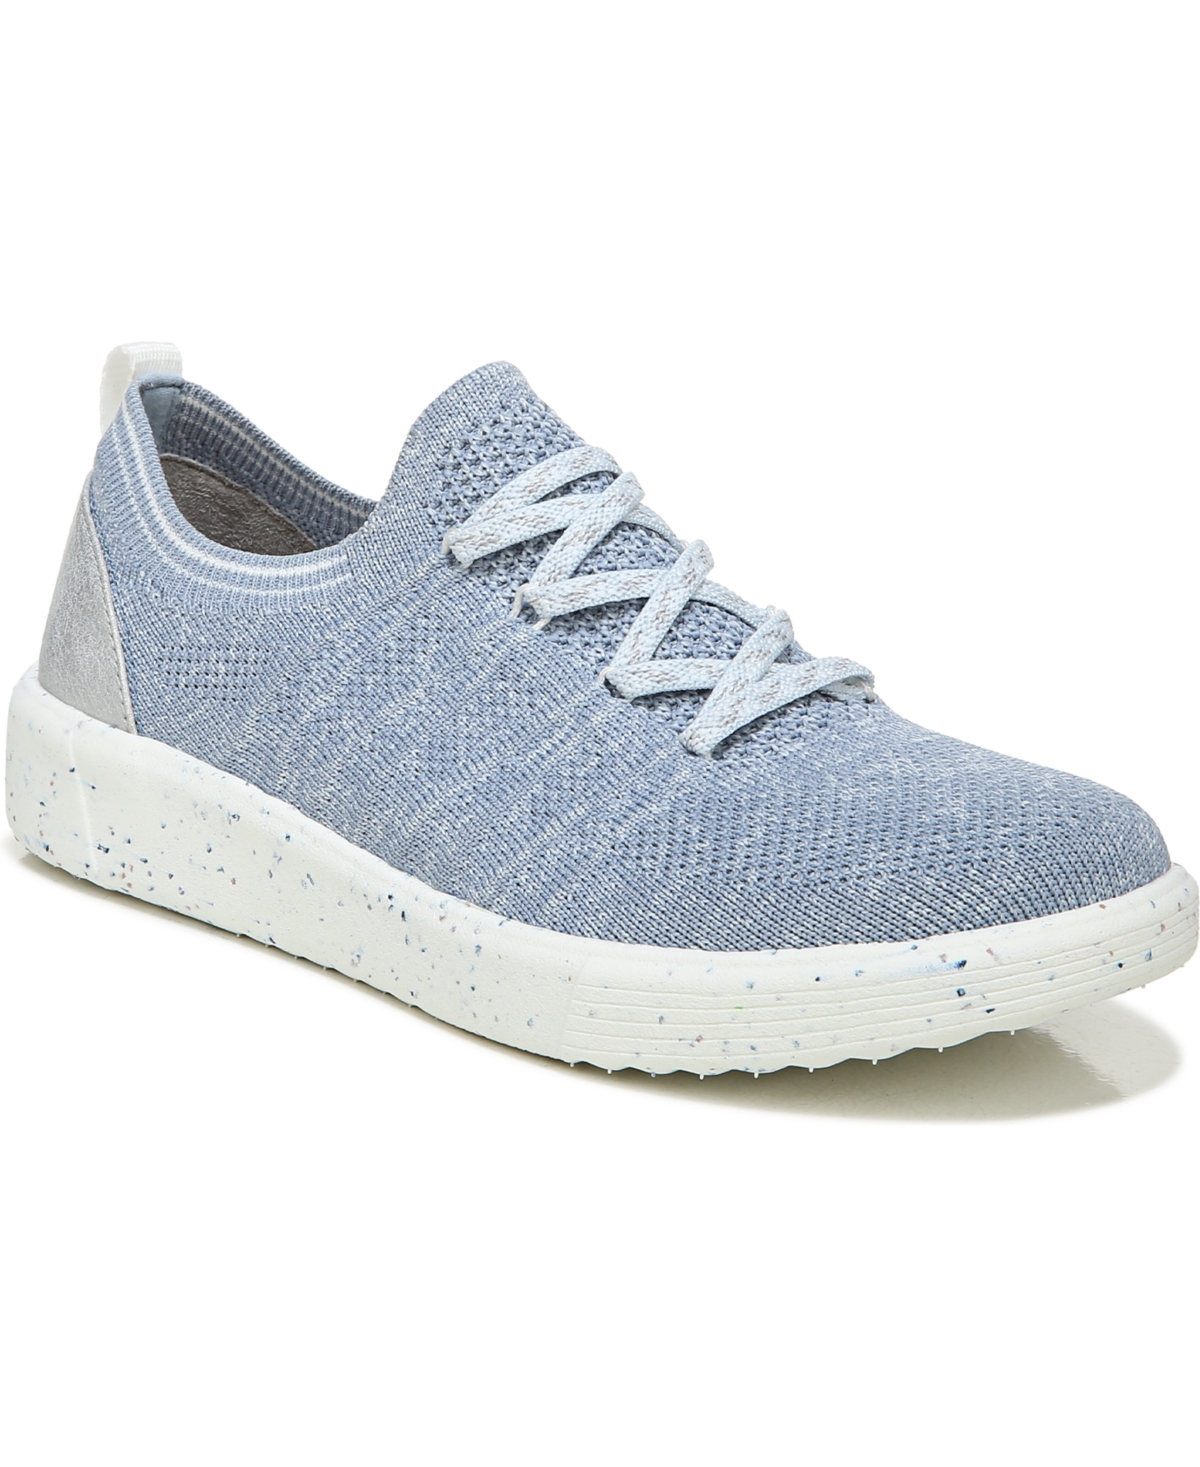 BZees Premium March On Washable Slip-on Sneakers Women's Shoes